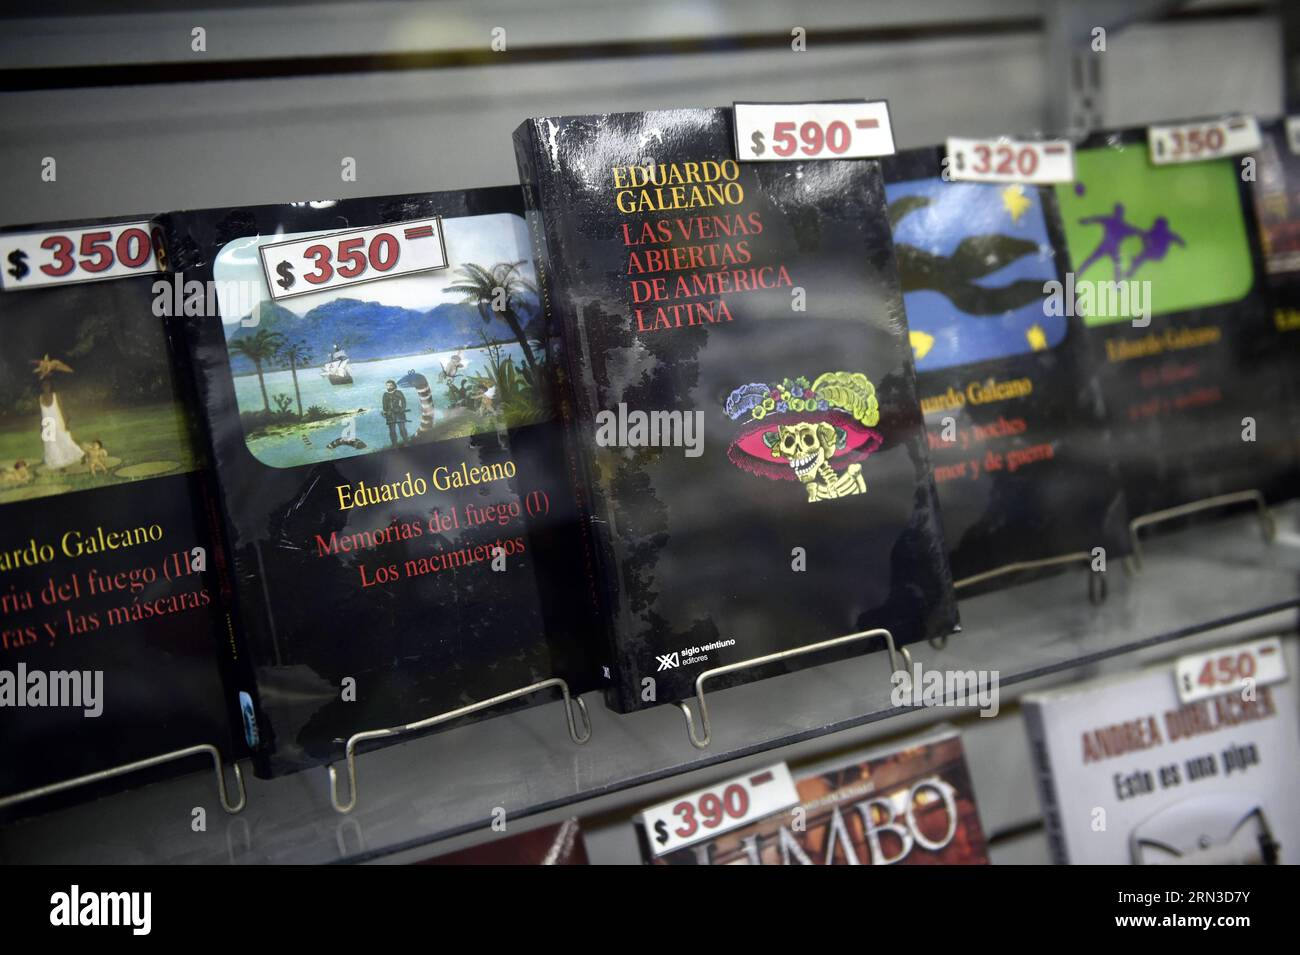 (150413) -- MONTEVIDEO, April 13, 2015 -- Books of Uruguayan writer Eduardo Galeano, are shown in a bookstore, in Montevideo, capital of Uruguay, on April 13, 2015. Uruguayan writer Eduardo Galeano, author of Open Veins of Latin America , died on Monday in Montevideo at 74 years old. Nicolas Celaya) (rtg) URUGUAY-MONTEVIDEO-CULTURE-EDUARDO GALEANO e NICOLASxCELAYA PUBLICATIONxNOTxINxCHN   Montevideo April 13 2015 Books of Uruguayan Writer Eduardo Galeano are Shown in a Bookstore in Montevideo Capital of Uruguay ON April 13 2015 Uruguayan Writer Eduardo Galeano author of Open  of Latin America Stock Photo